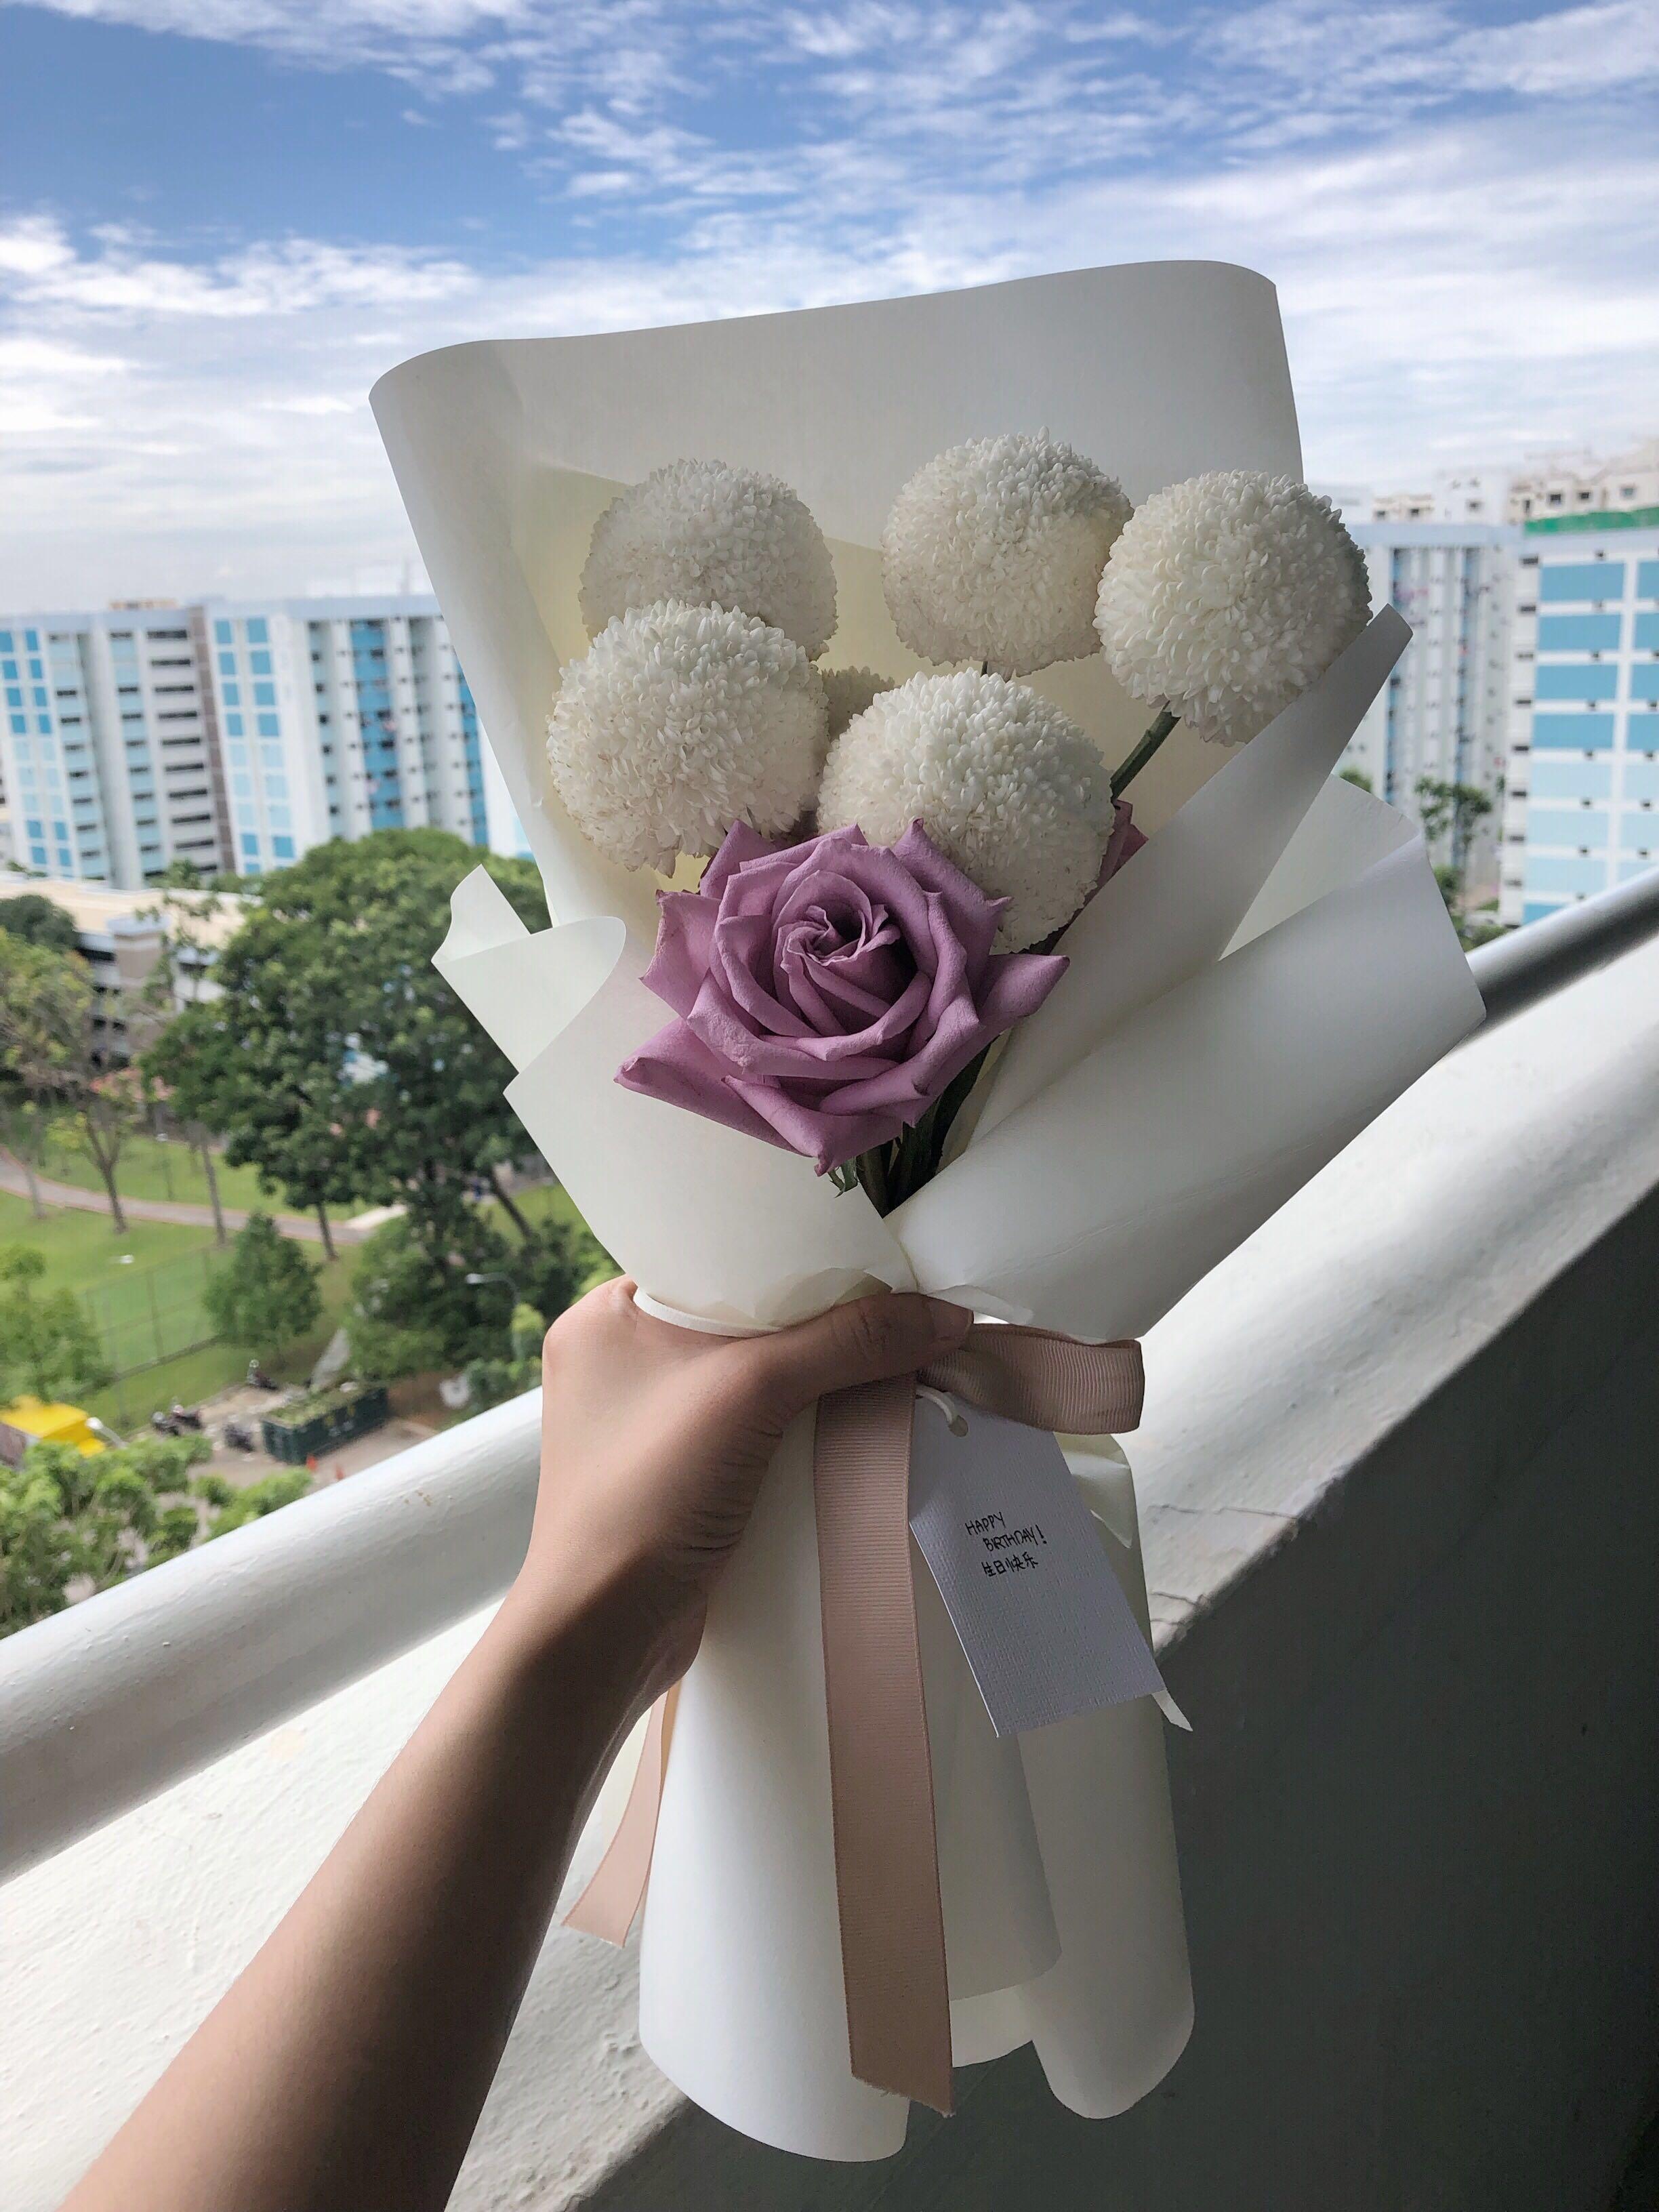 Korean Style Wrapping - Florist Singapore Flower Delivery